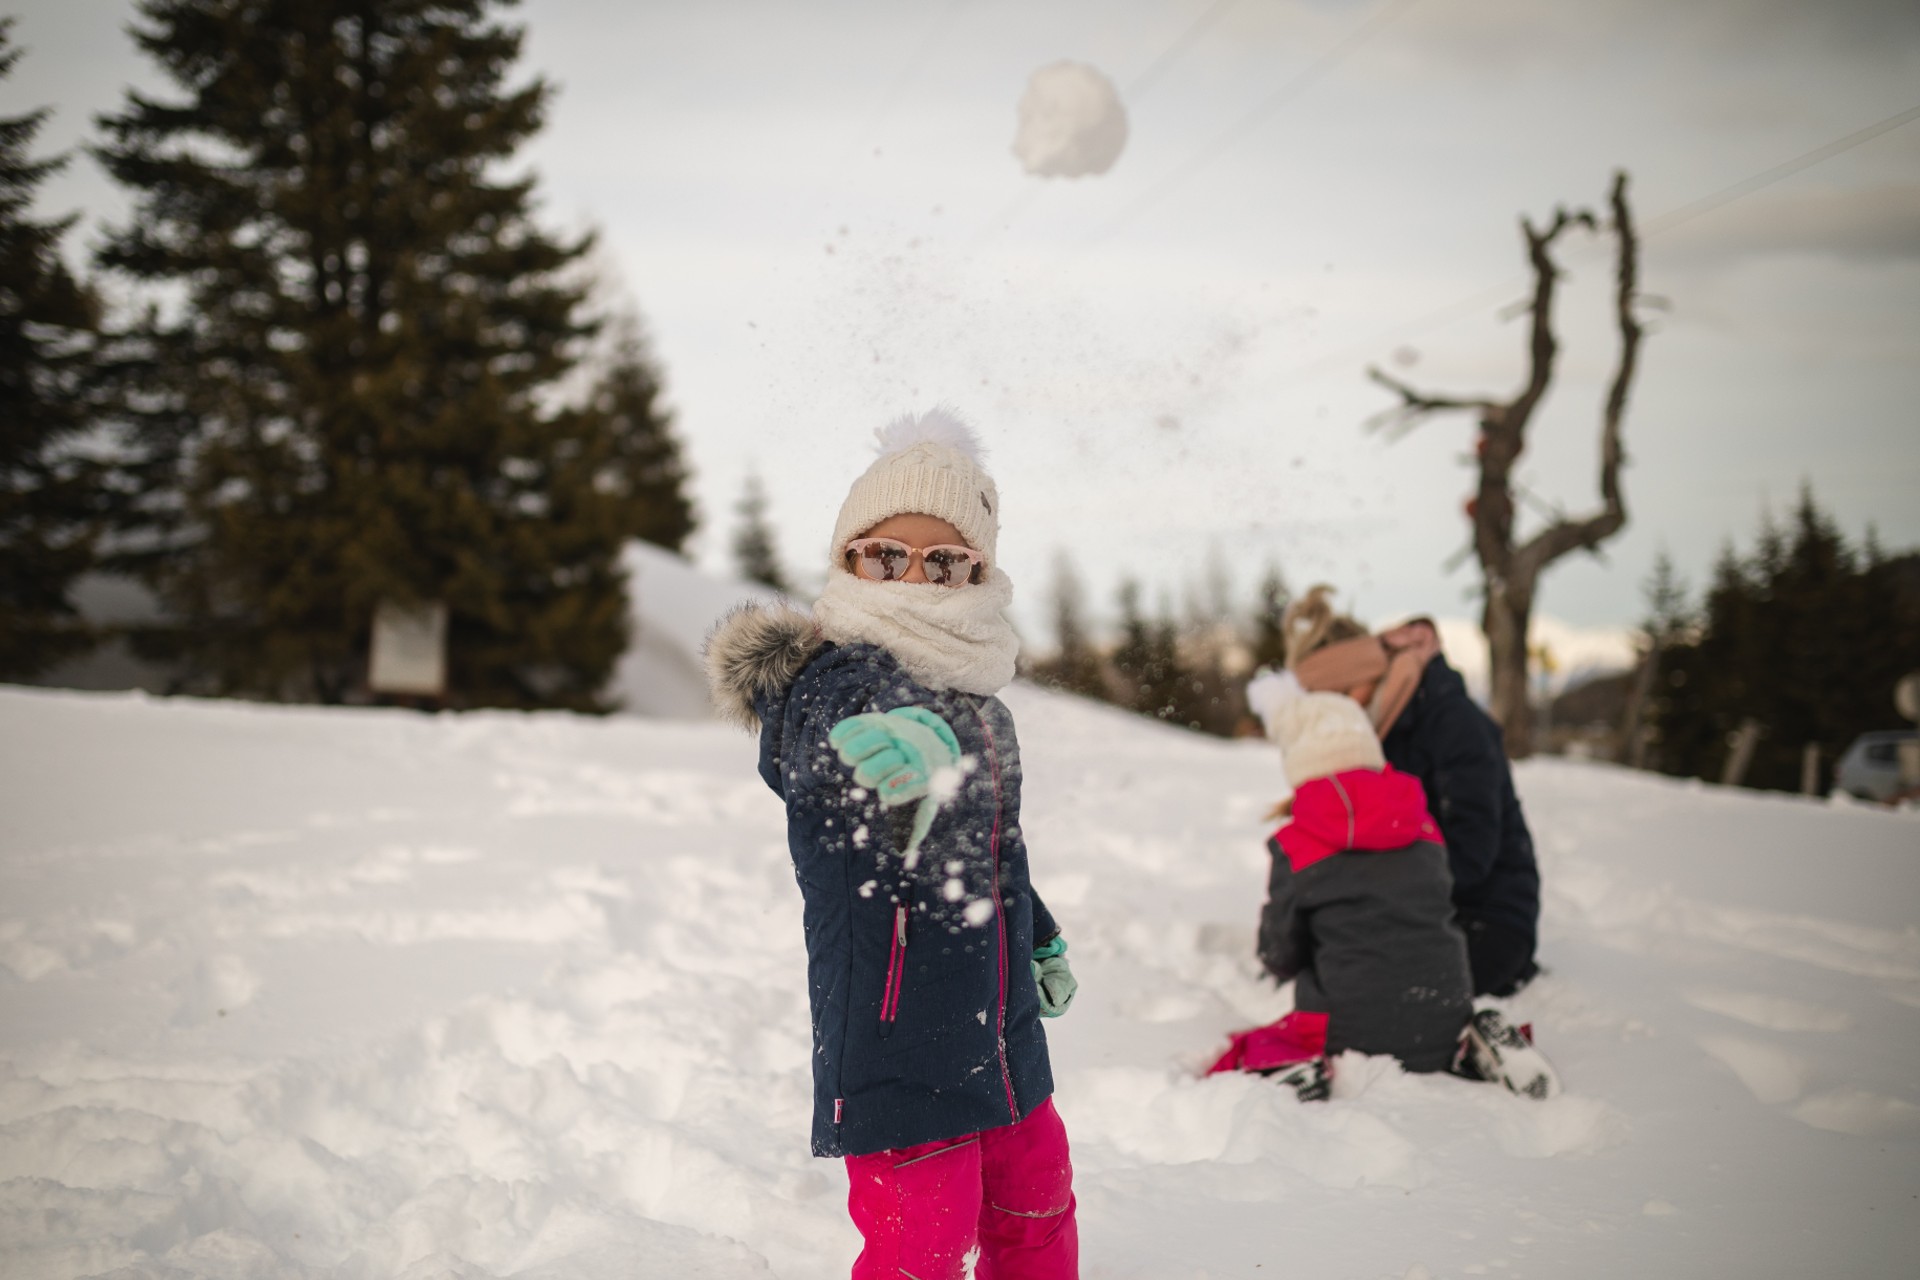 girl playfully throws a snowball towards the camera as her mom and sibling build a snowman in the background